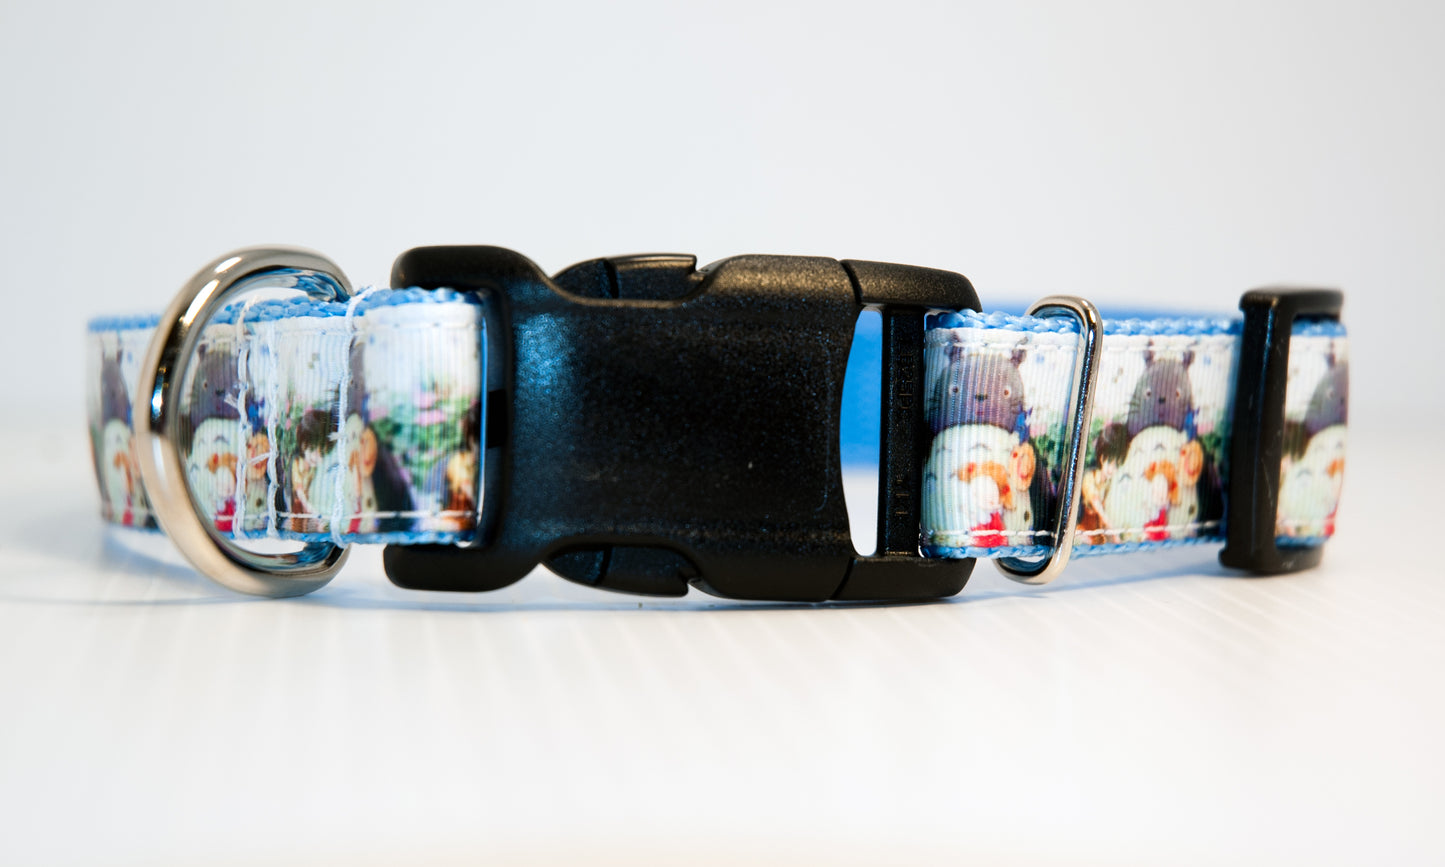 Toto and Friends anime dog collar. 1 inch wide